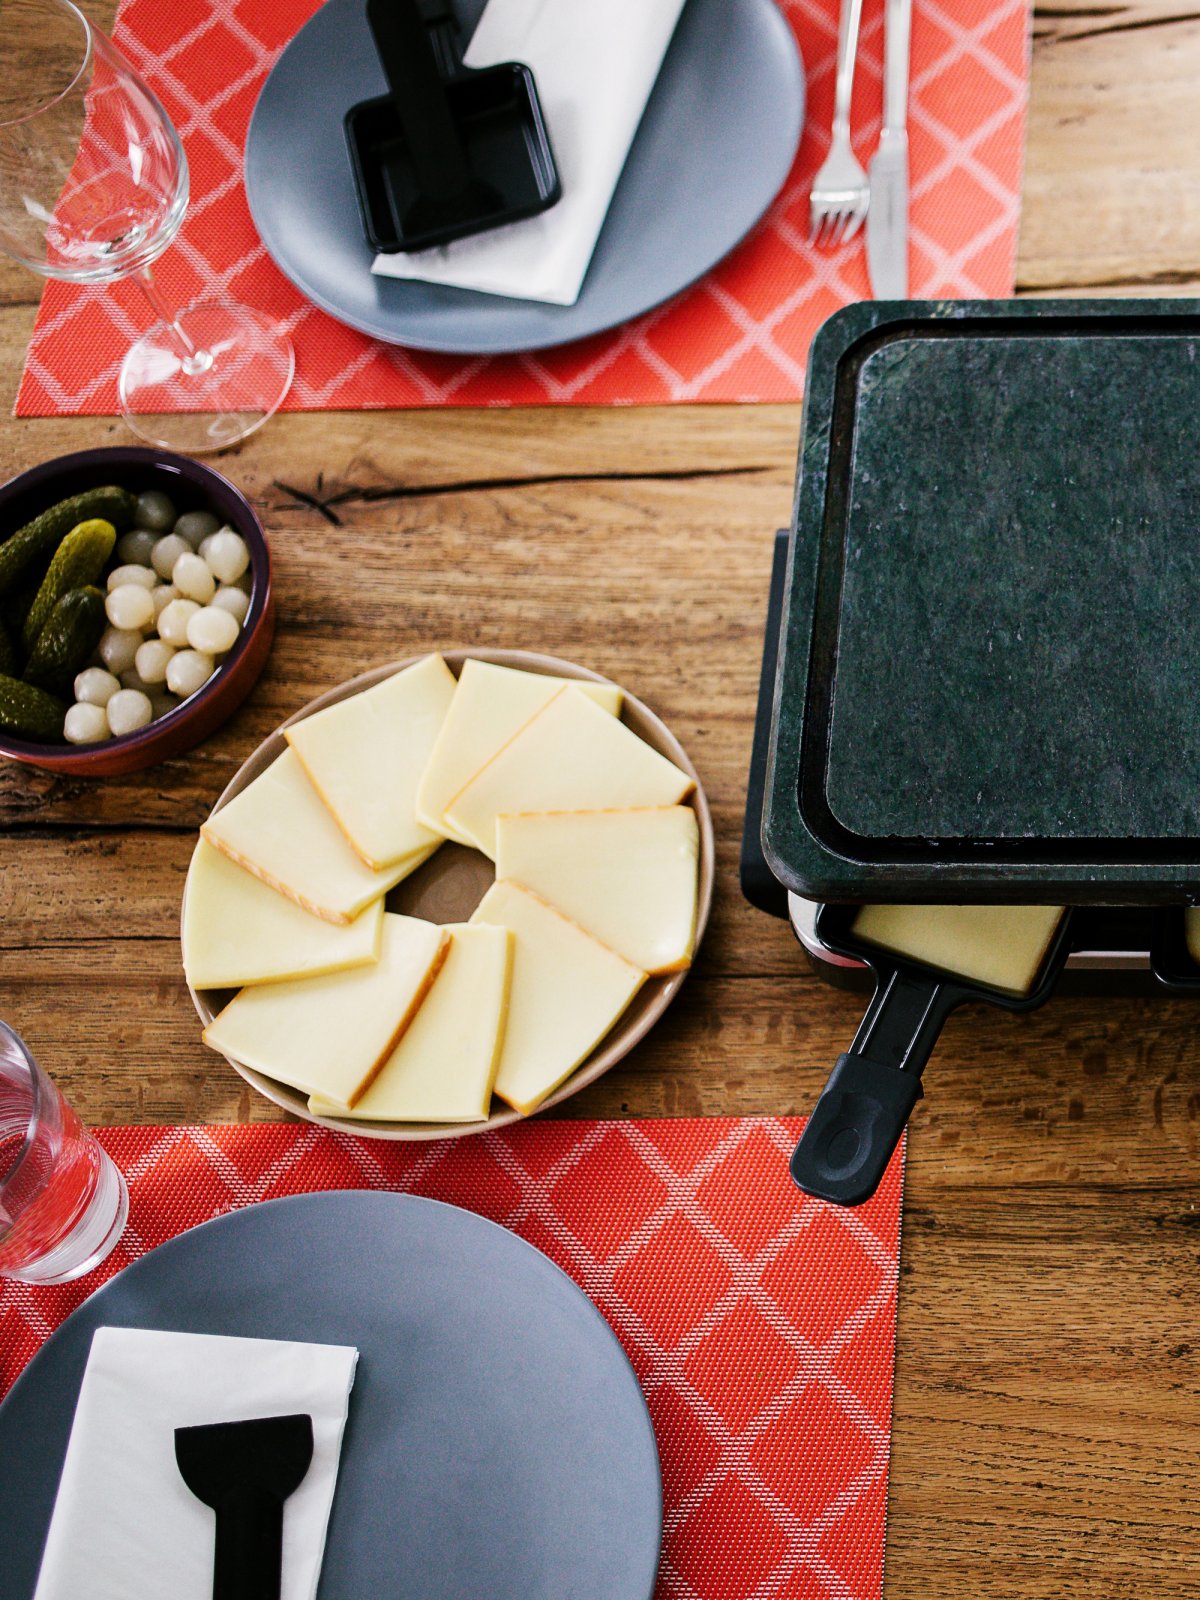 Swiss Winter Foods Guide - Raclette Melted Cheese